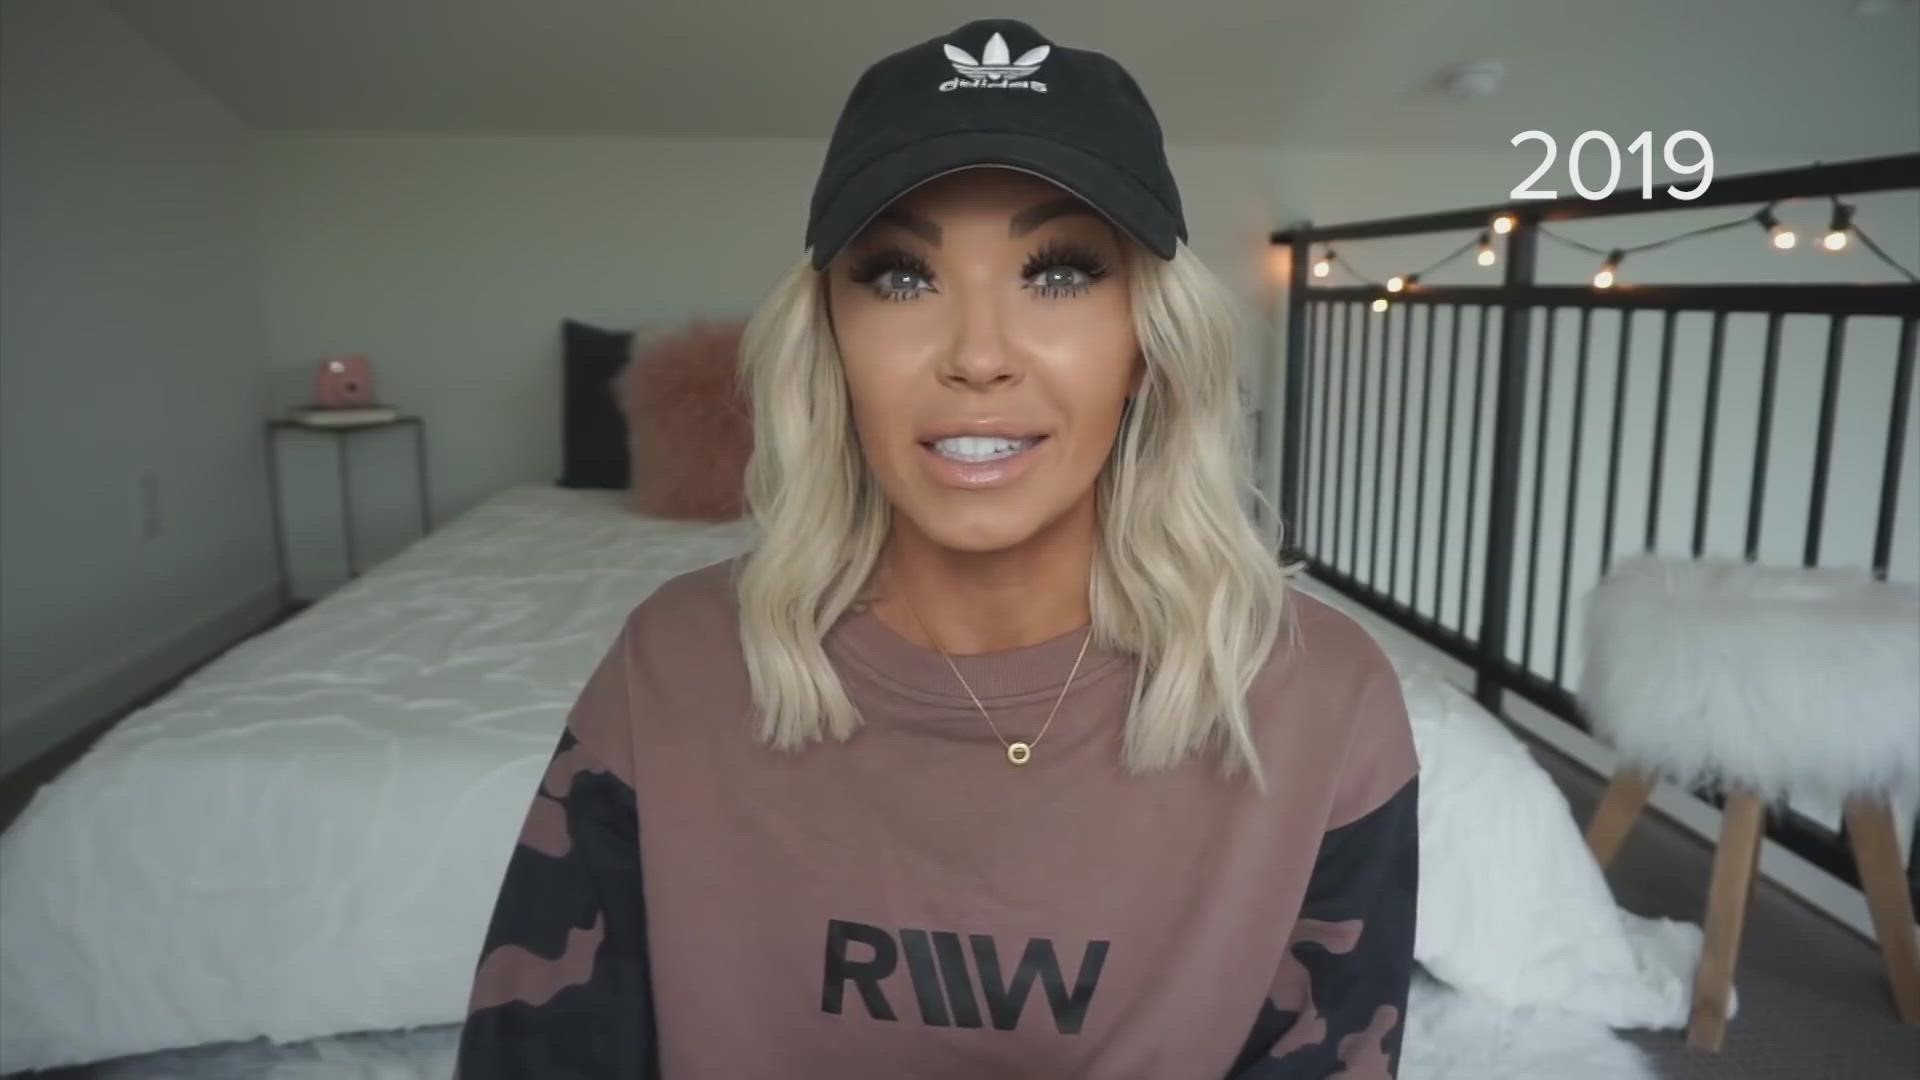 The influencer was sued in 2022 by the Texas Attorney General who said she never provided any of the personal coaching she promised.